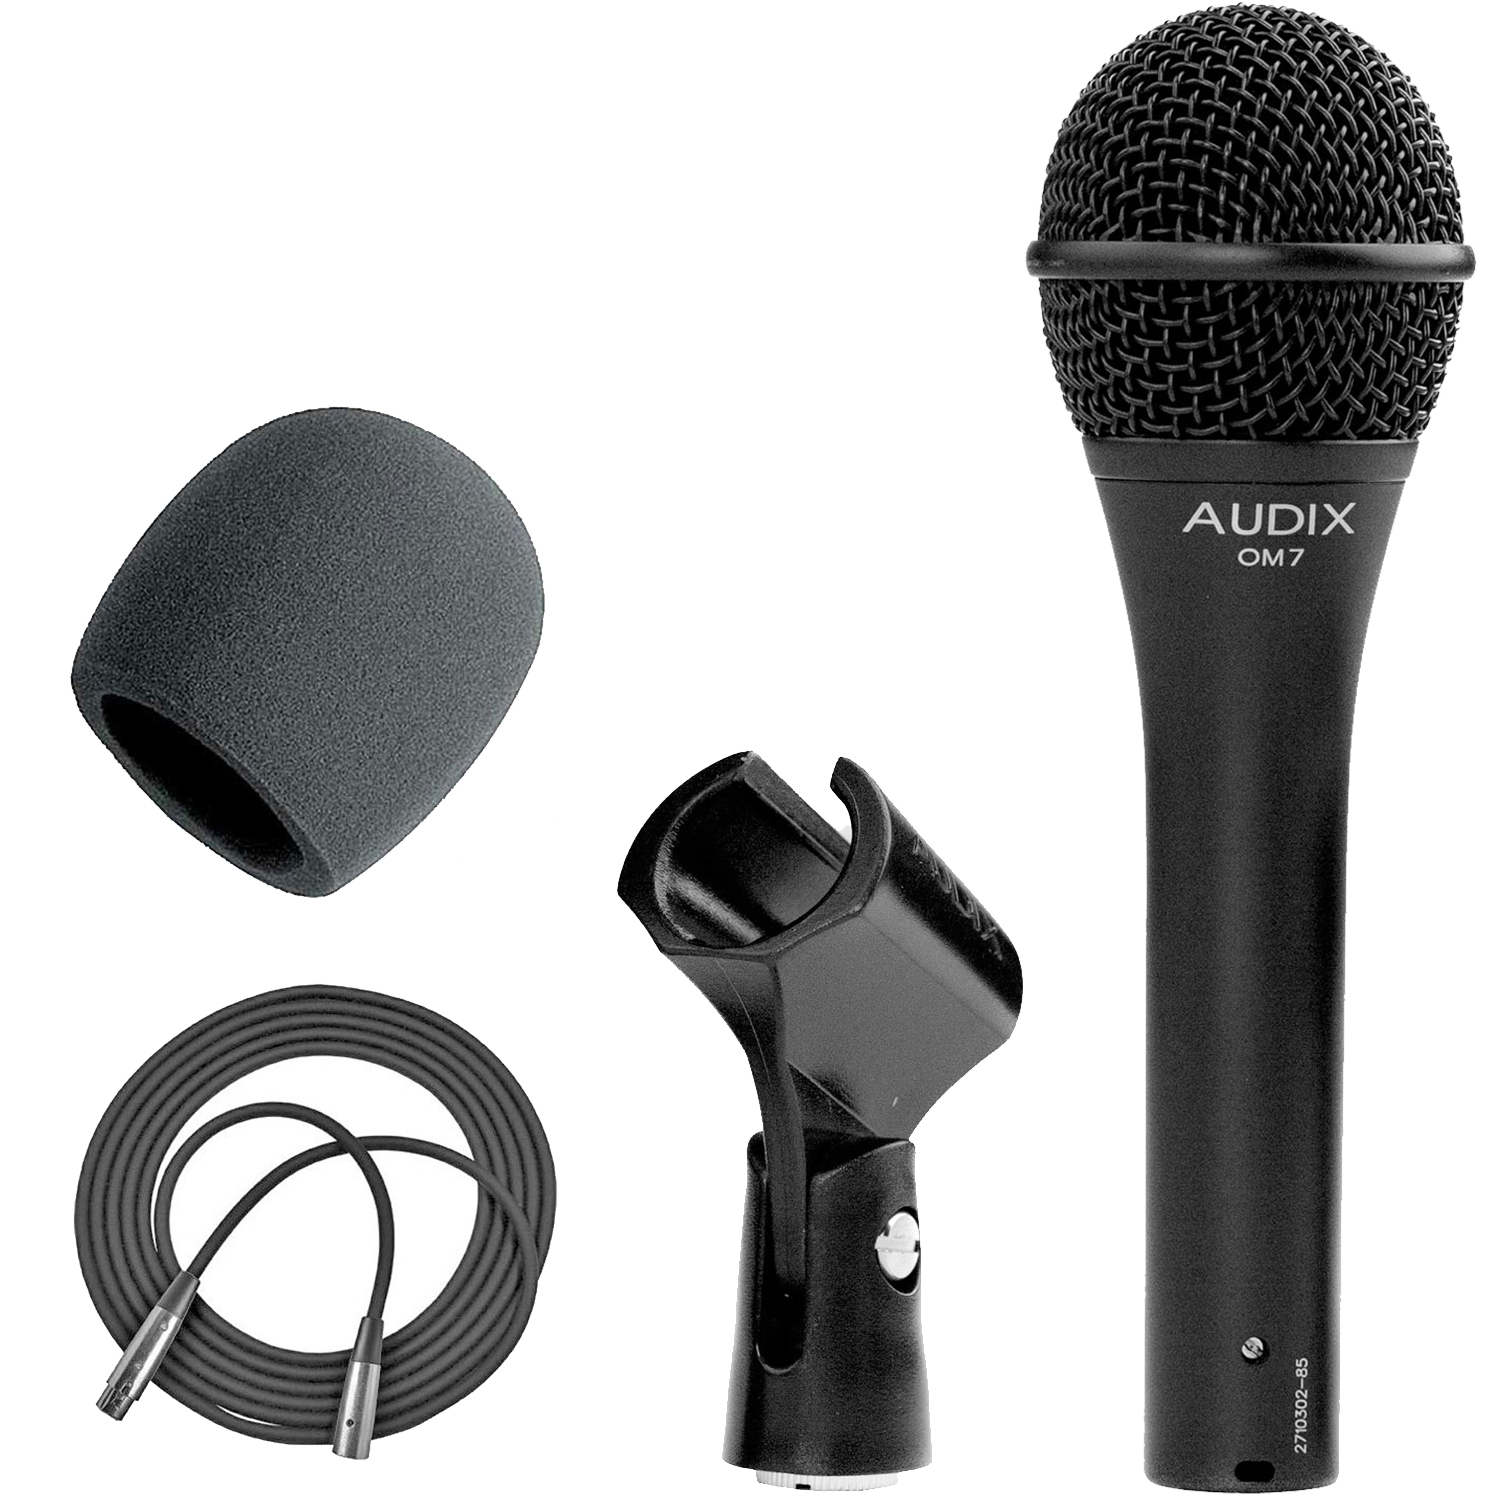 Audix OM7 Handheld Hypercardioid Dynamic Microphone + On Stage ASWS58B Foam  Windscreen for Handheld Microphones + XLR Mic Cable XLR-M to XLR-F